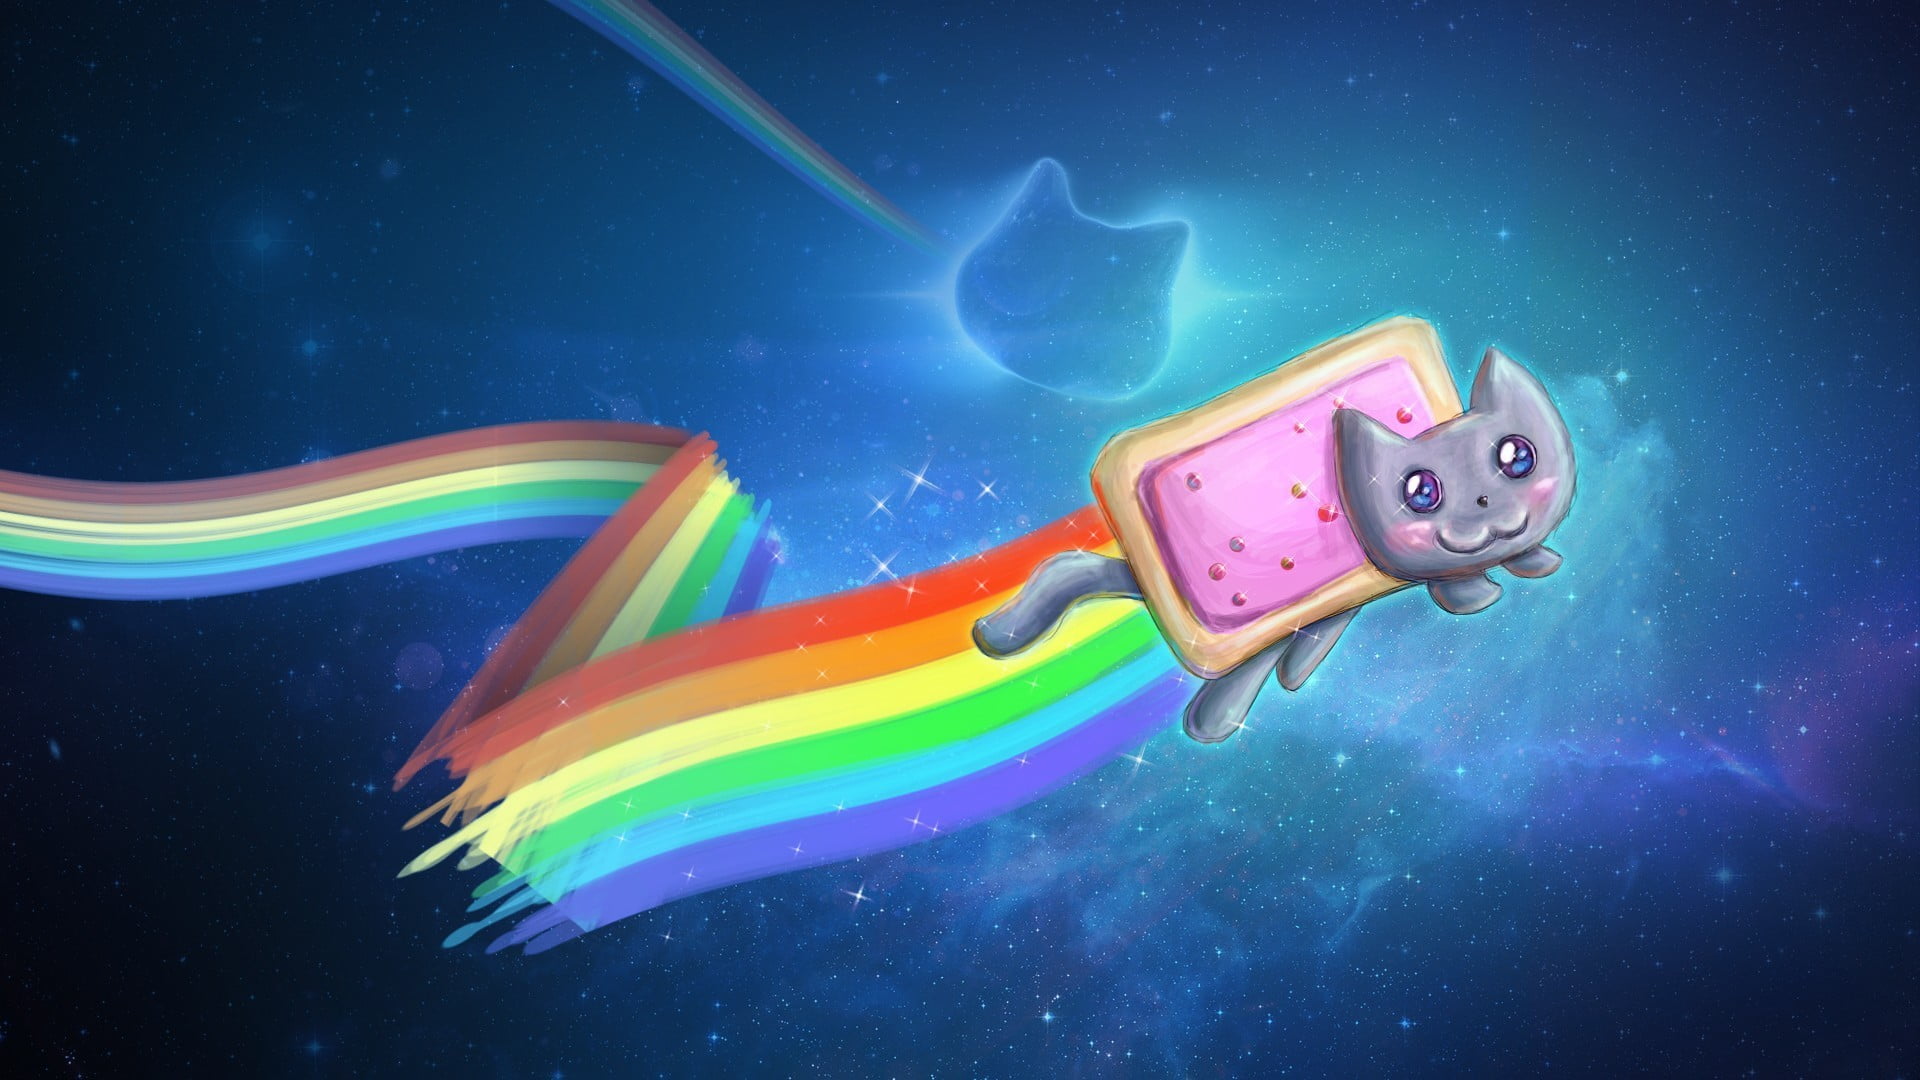 Nyan cat illustration, cartoon, video games, multi colored, star - space